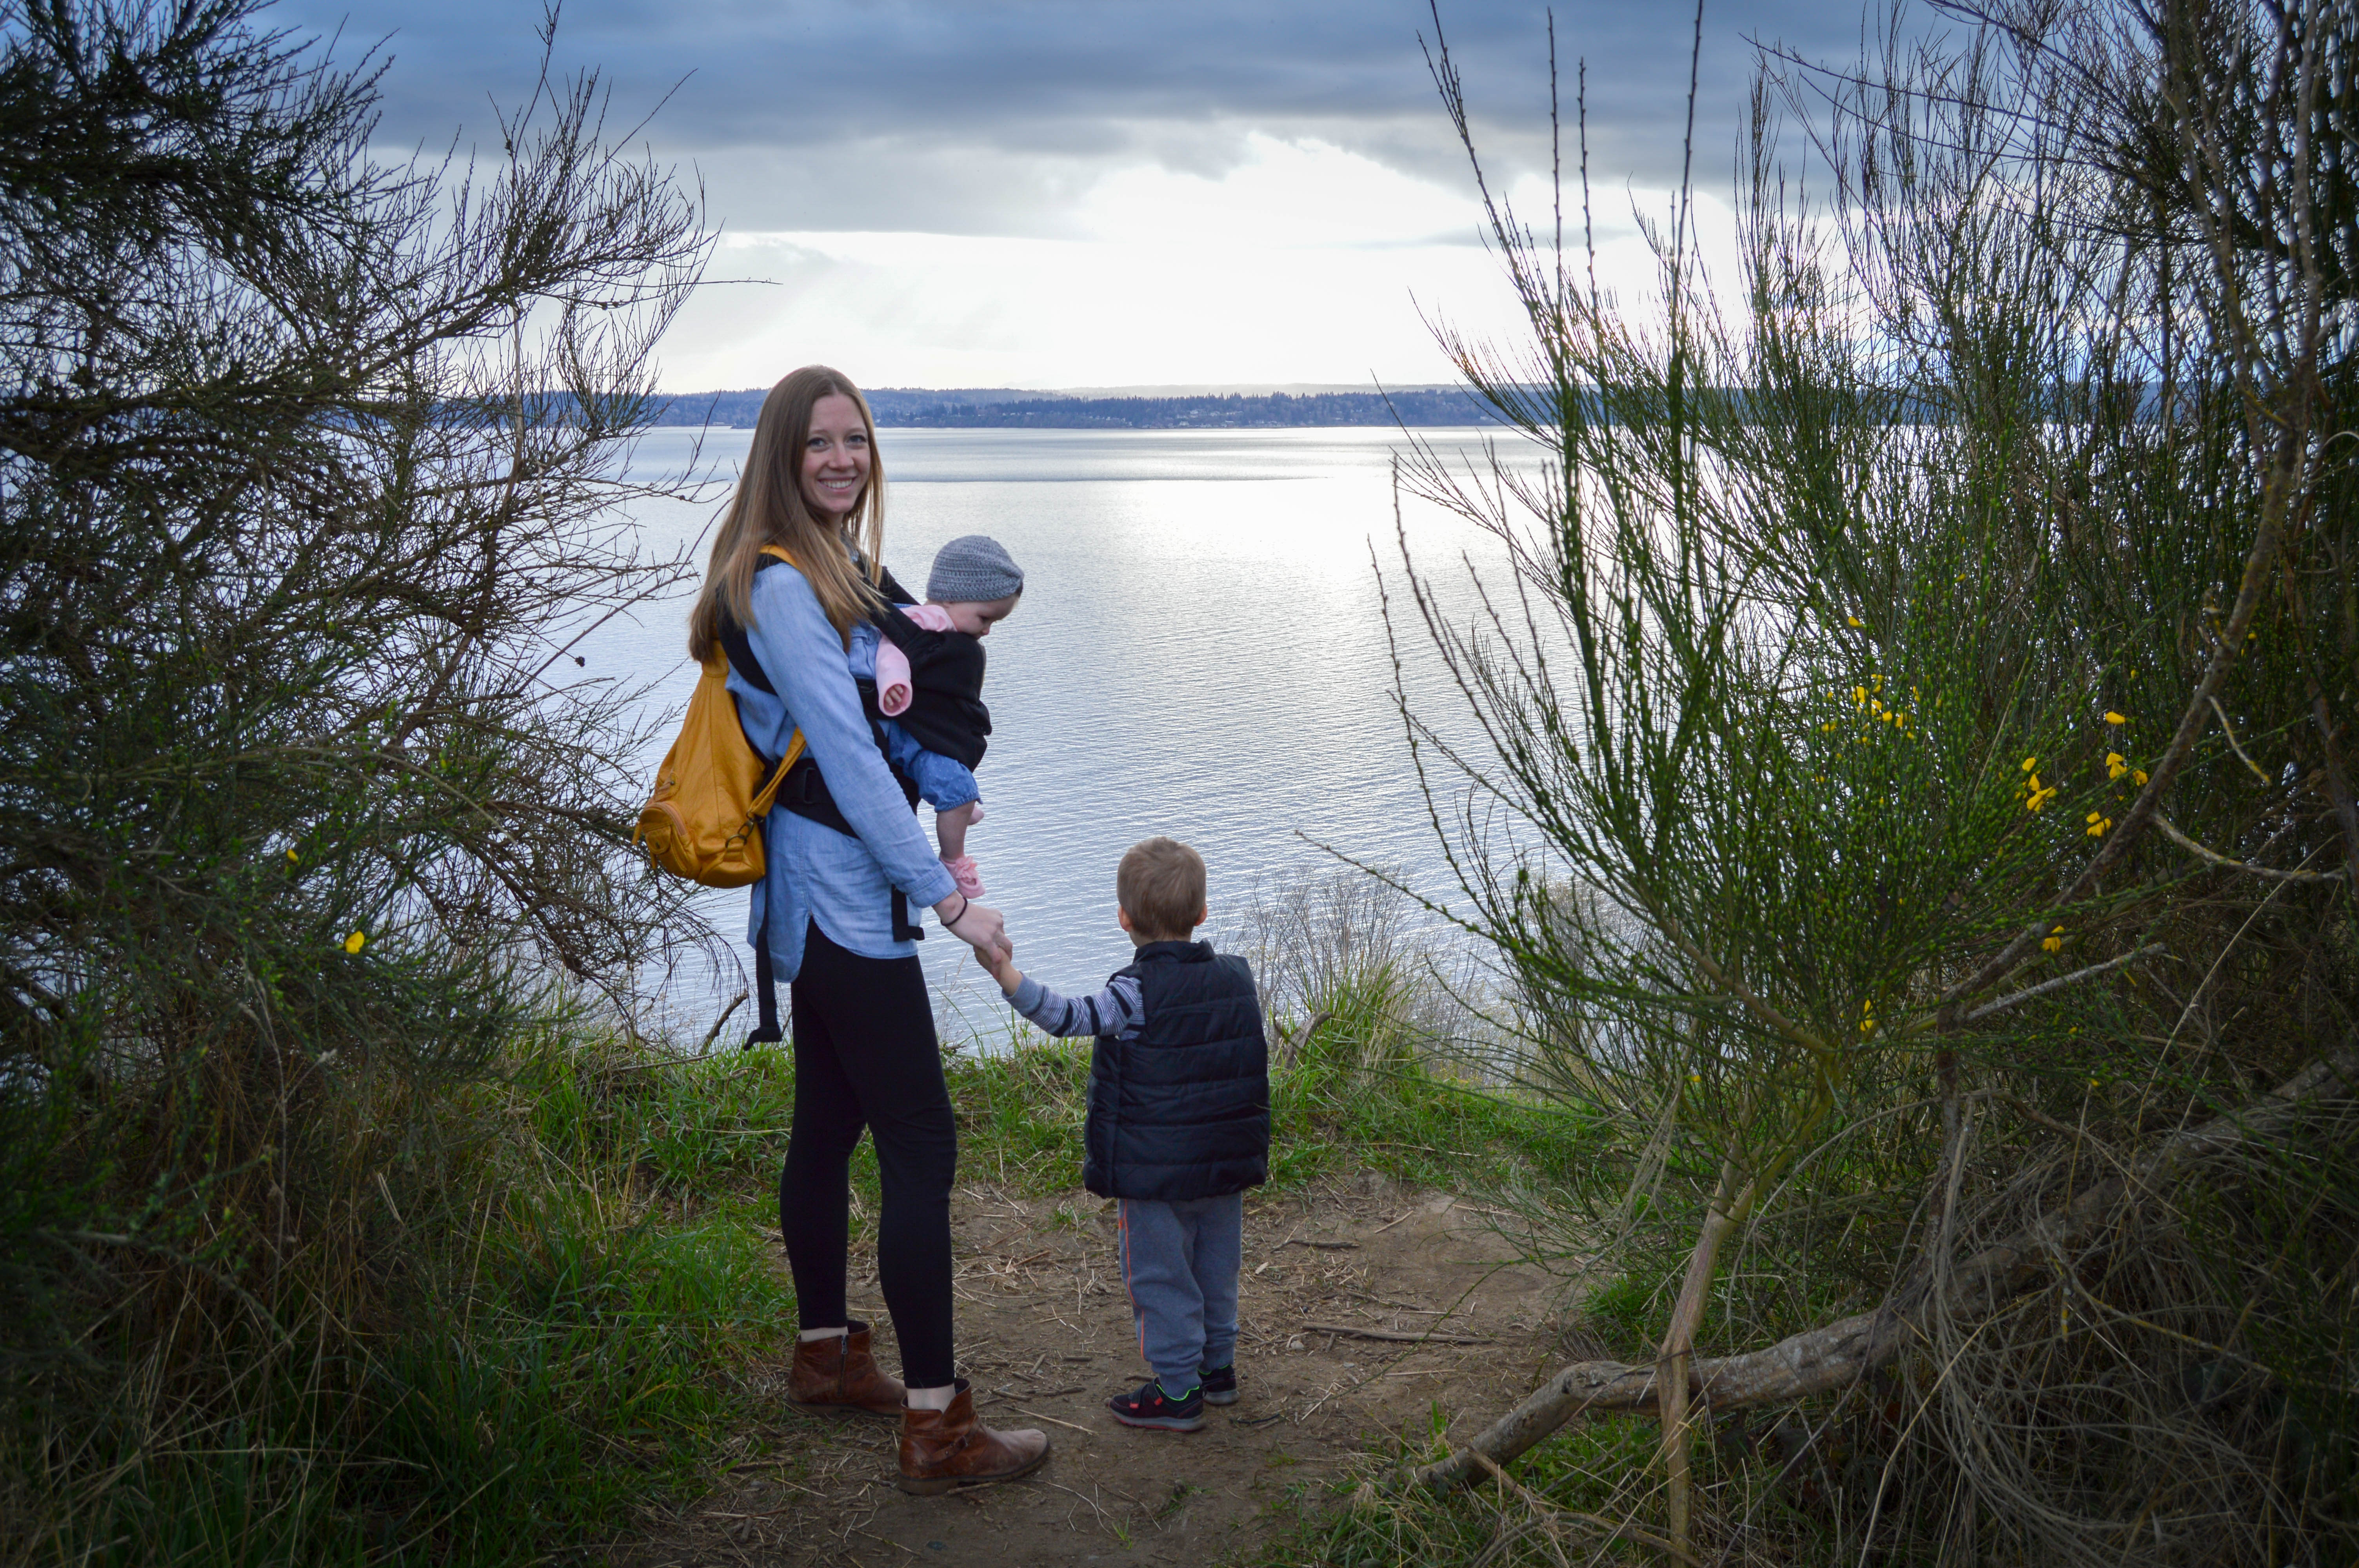 Discovery Park Adventure: Puget Sound viewpoint